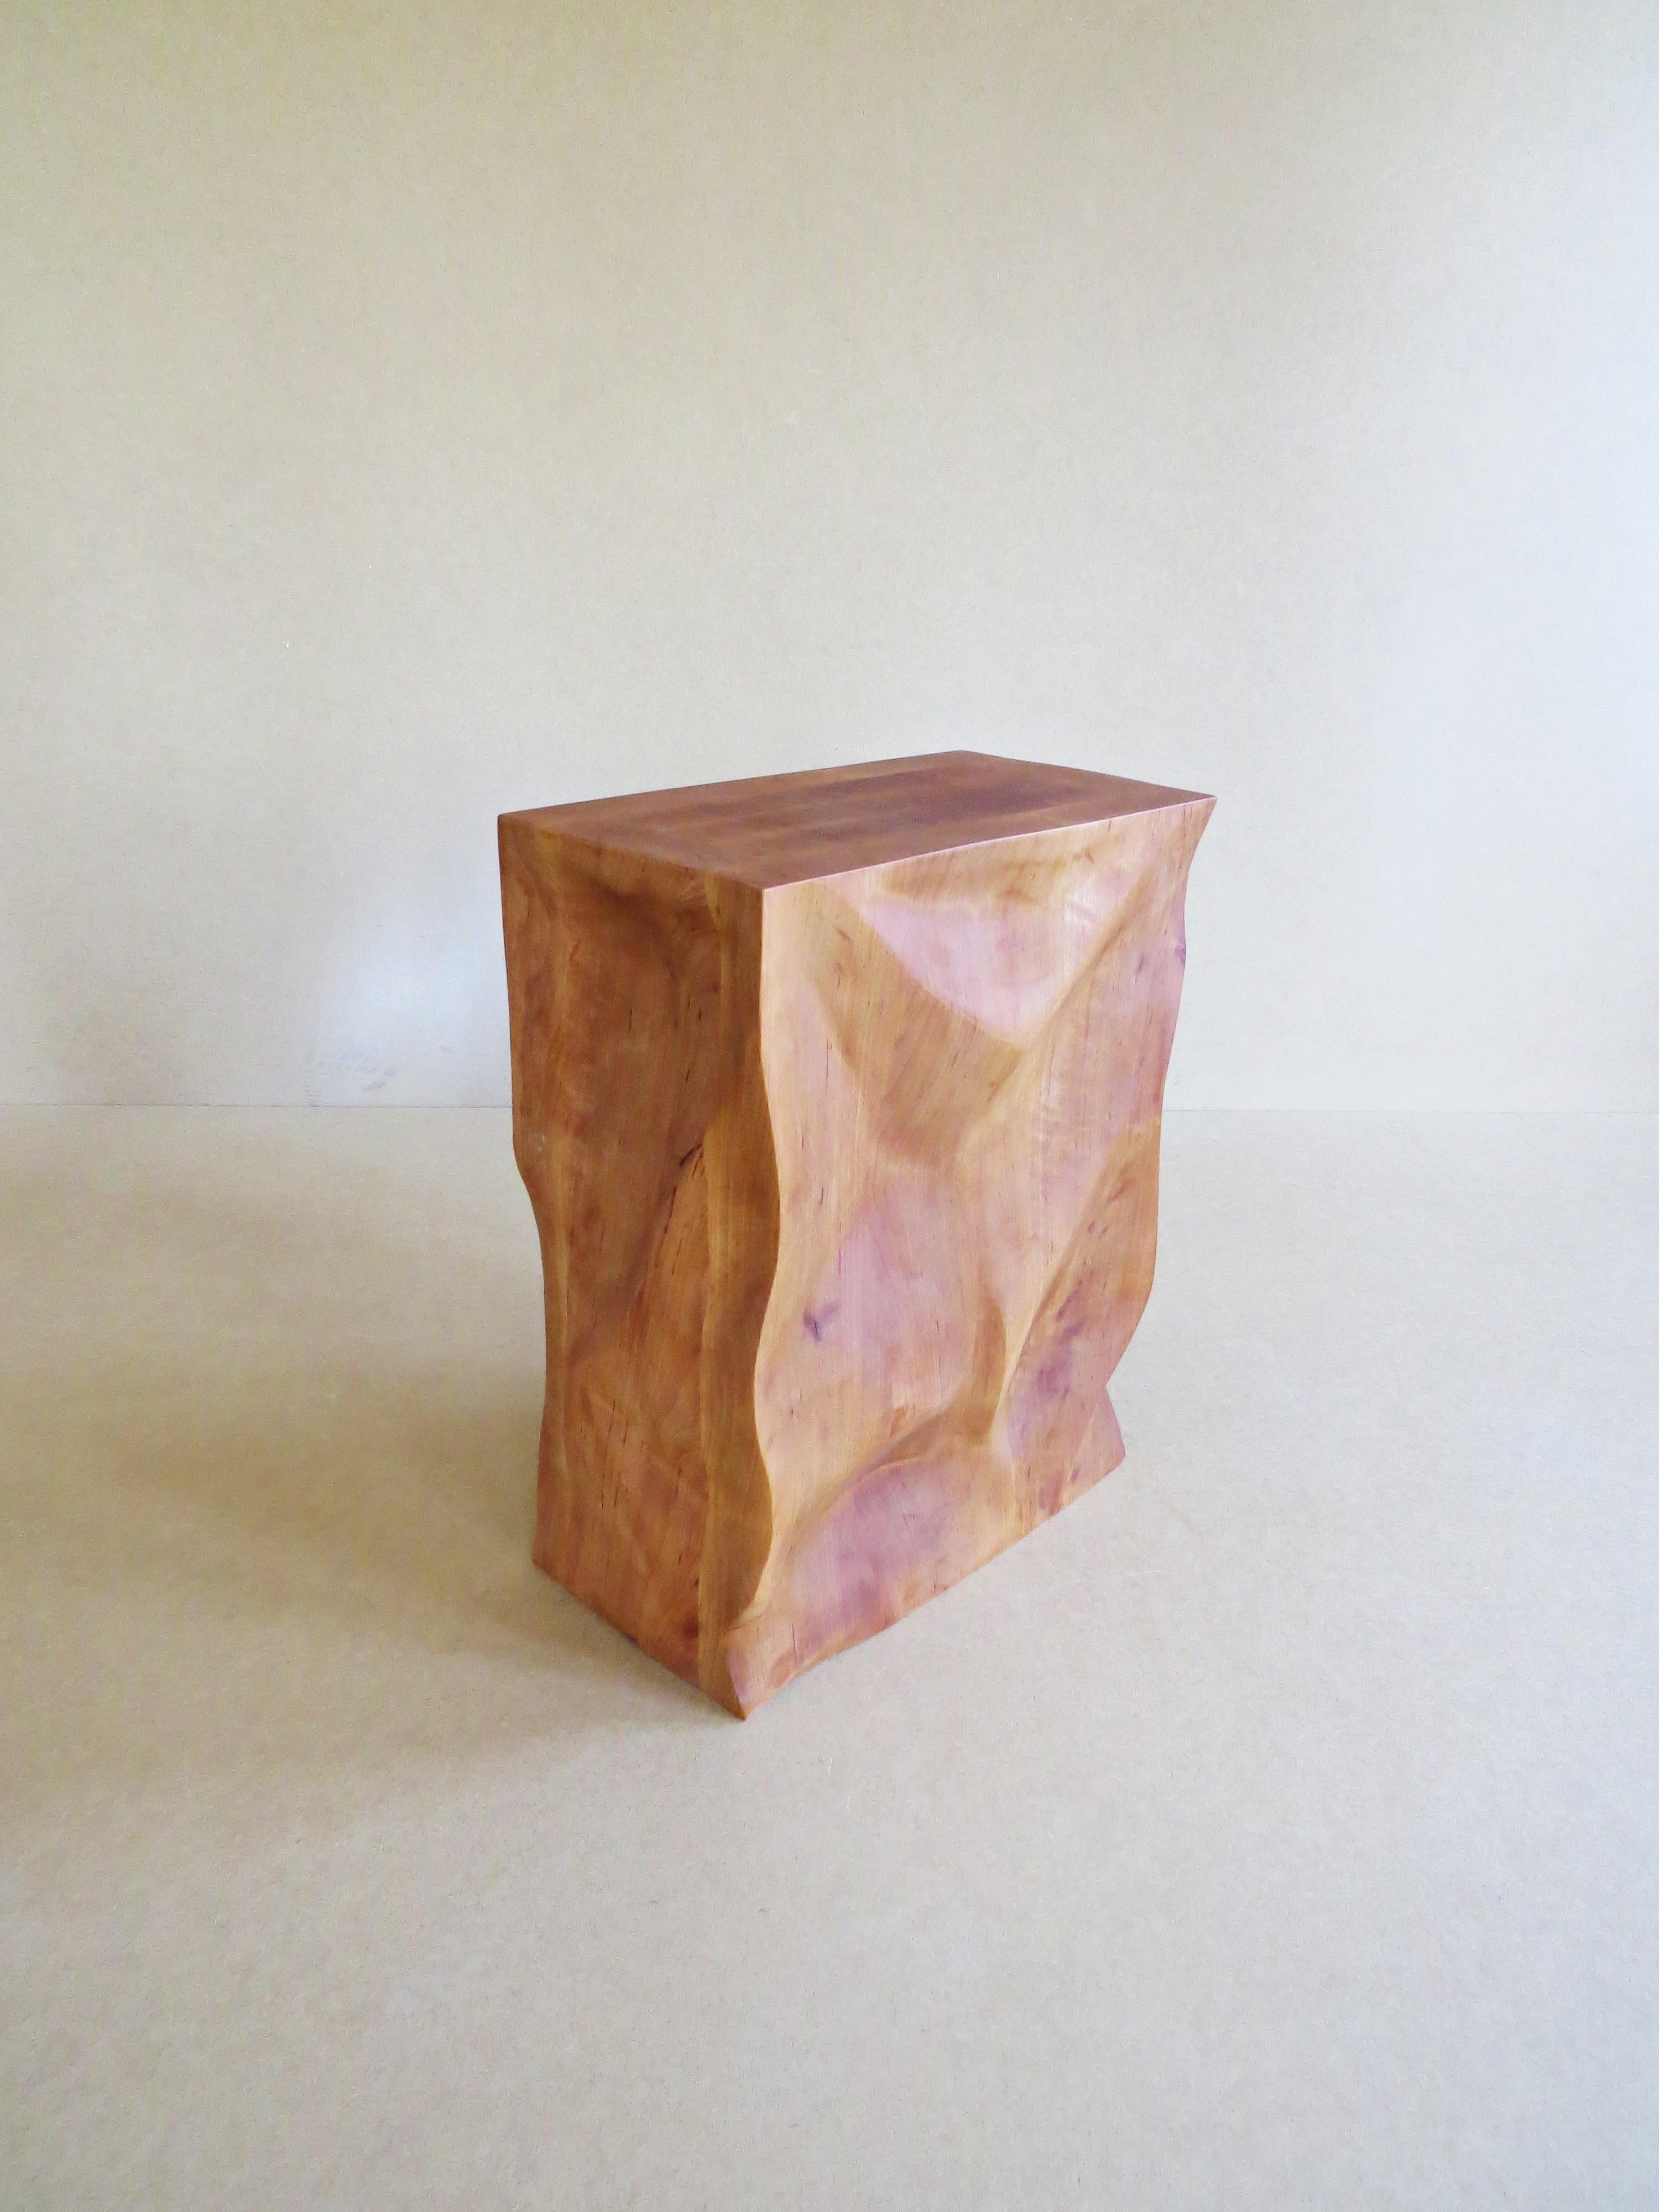 Organic Modern Modern, European, 21st Century, Side Table, Stool, Solid Wood, Sculptural For Sale